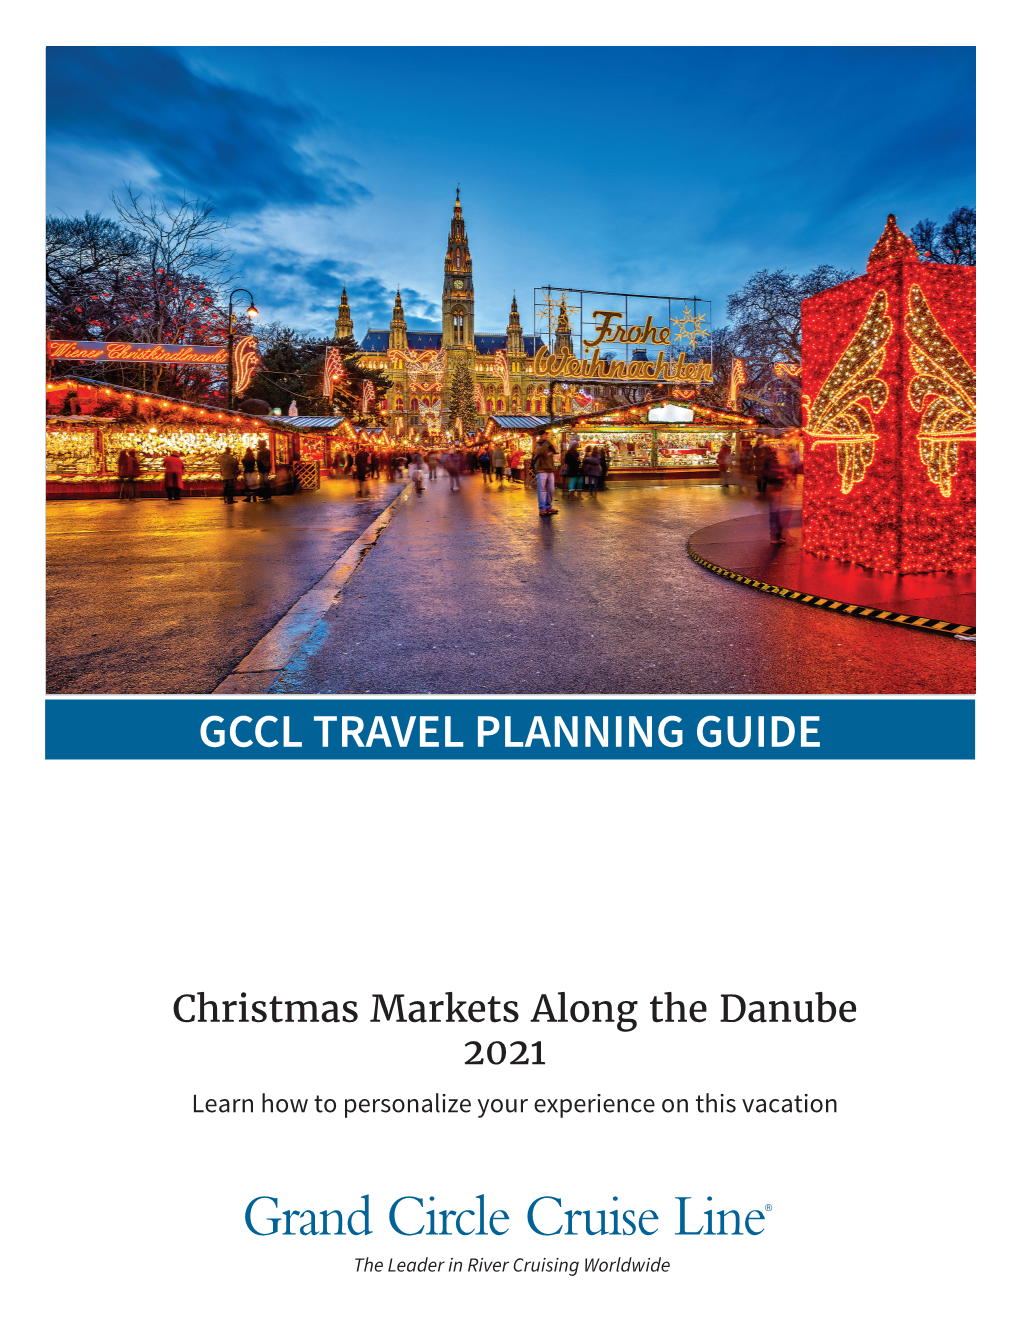 View Travel Planning Guide